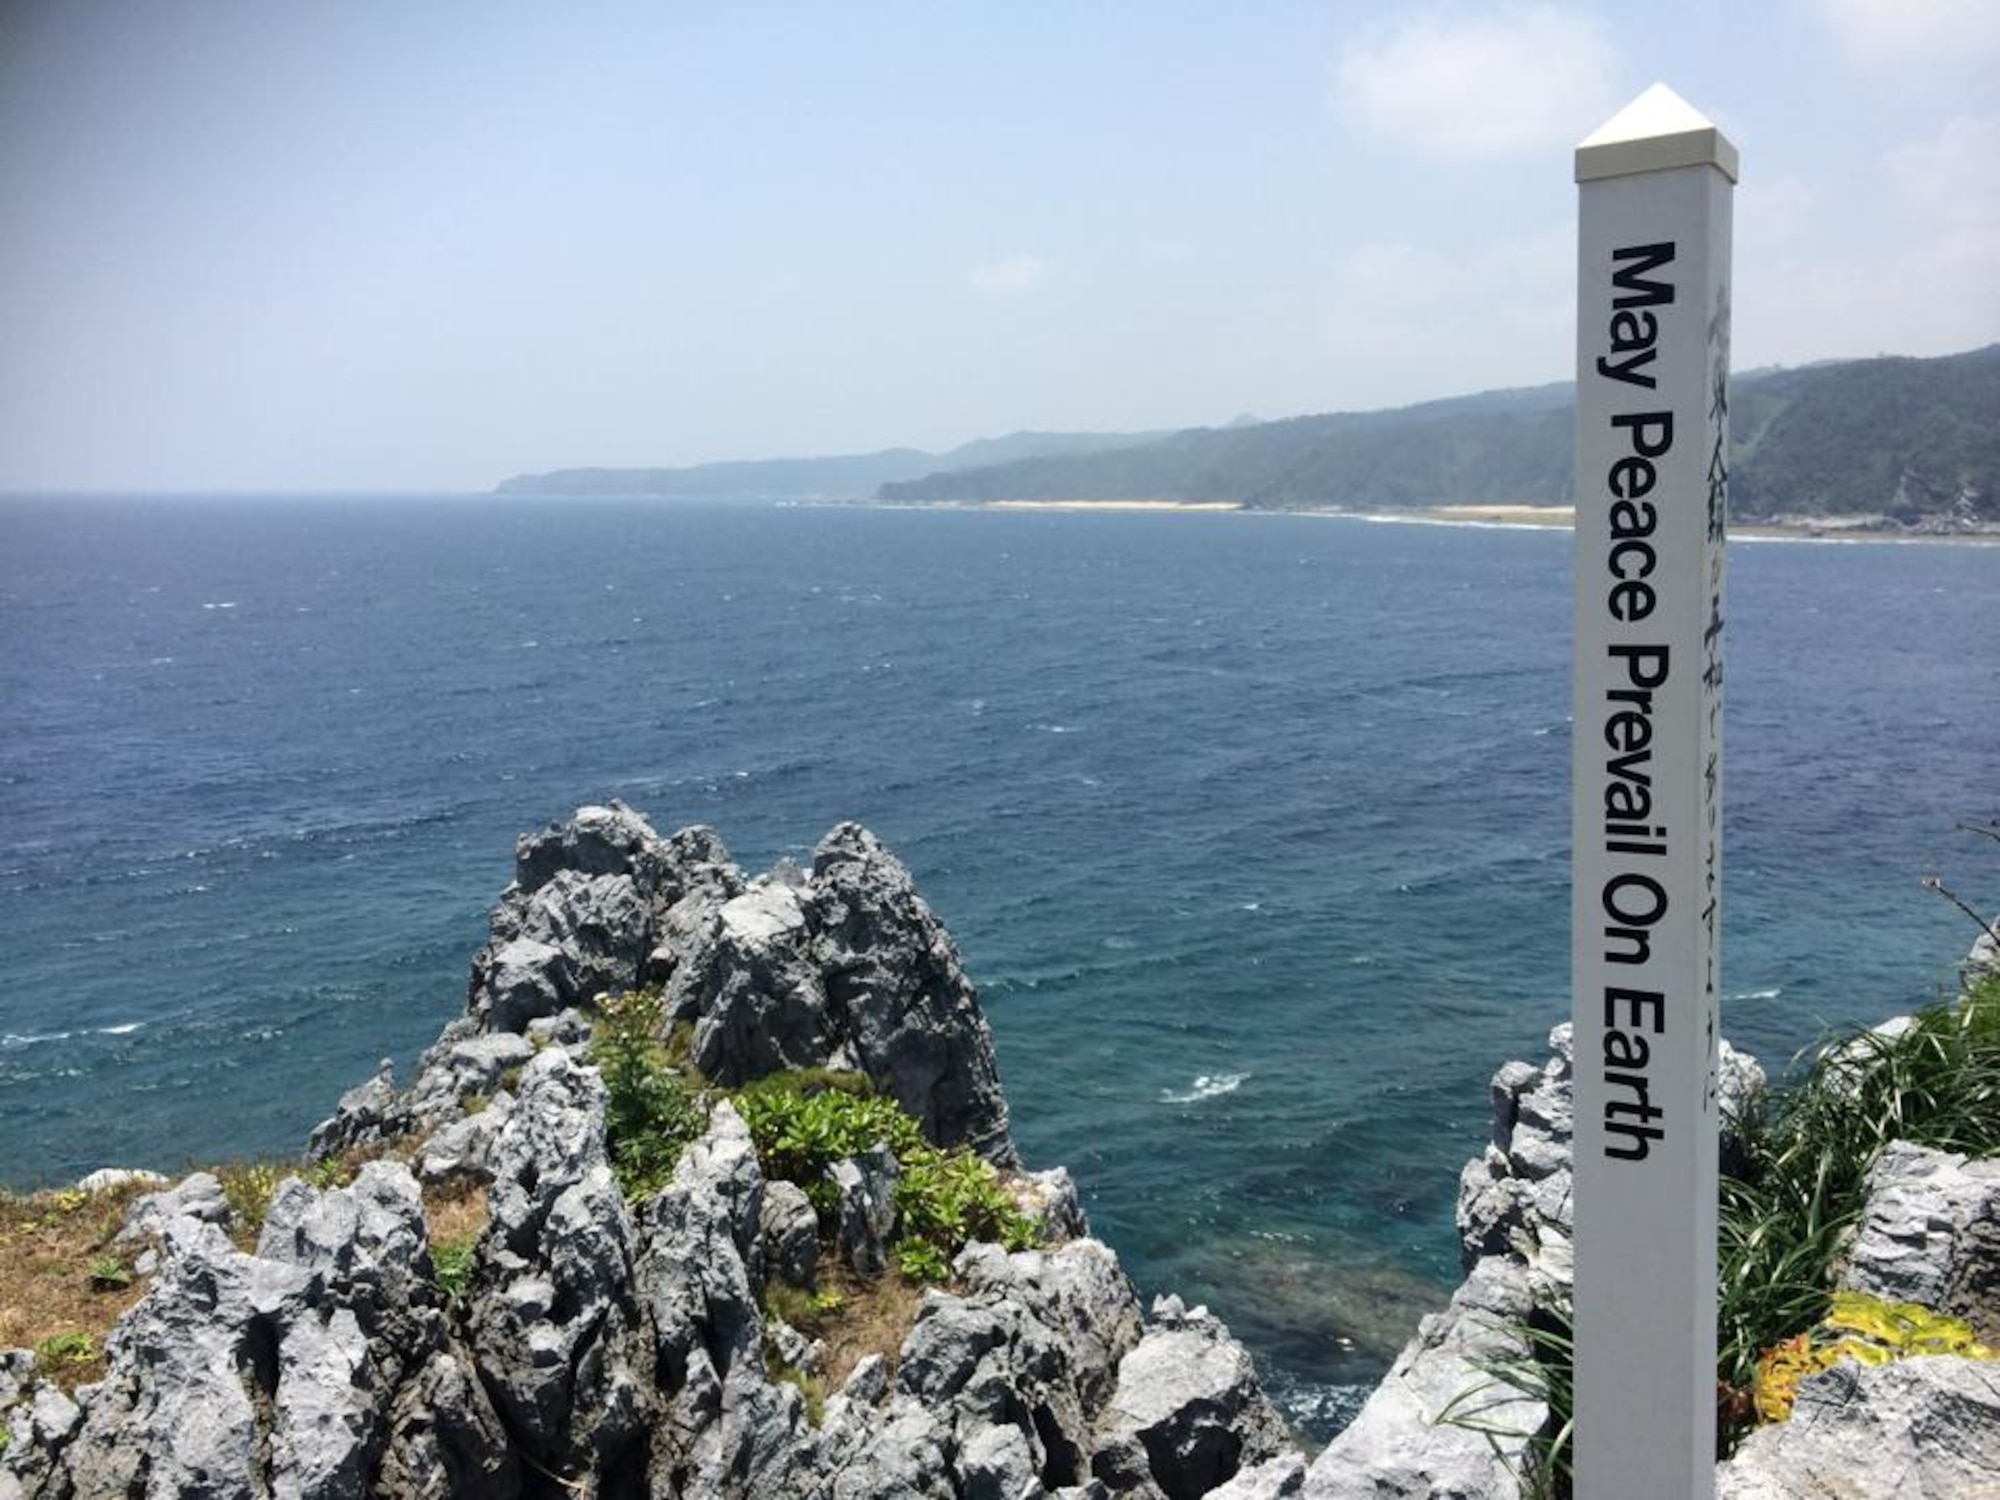 Several monuments, including the marker, “May Peace Prevail on Earth,” were found at Hedo Point, the northern-most spot on Okinawa, during an Oct. 18, 2015, visit. Hedo, a 90-kilometer drive from Kadena Air Base, offers an interesting day trip to explore the island. (U.S. Air Force photo by Master Sgt. Jason W. Edwards)